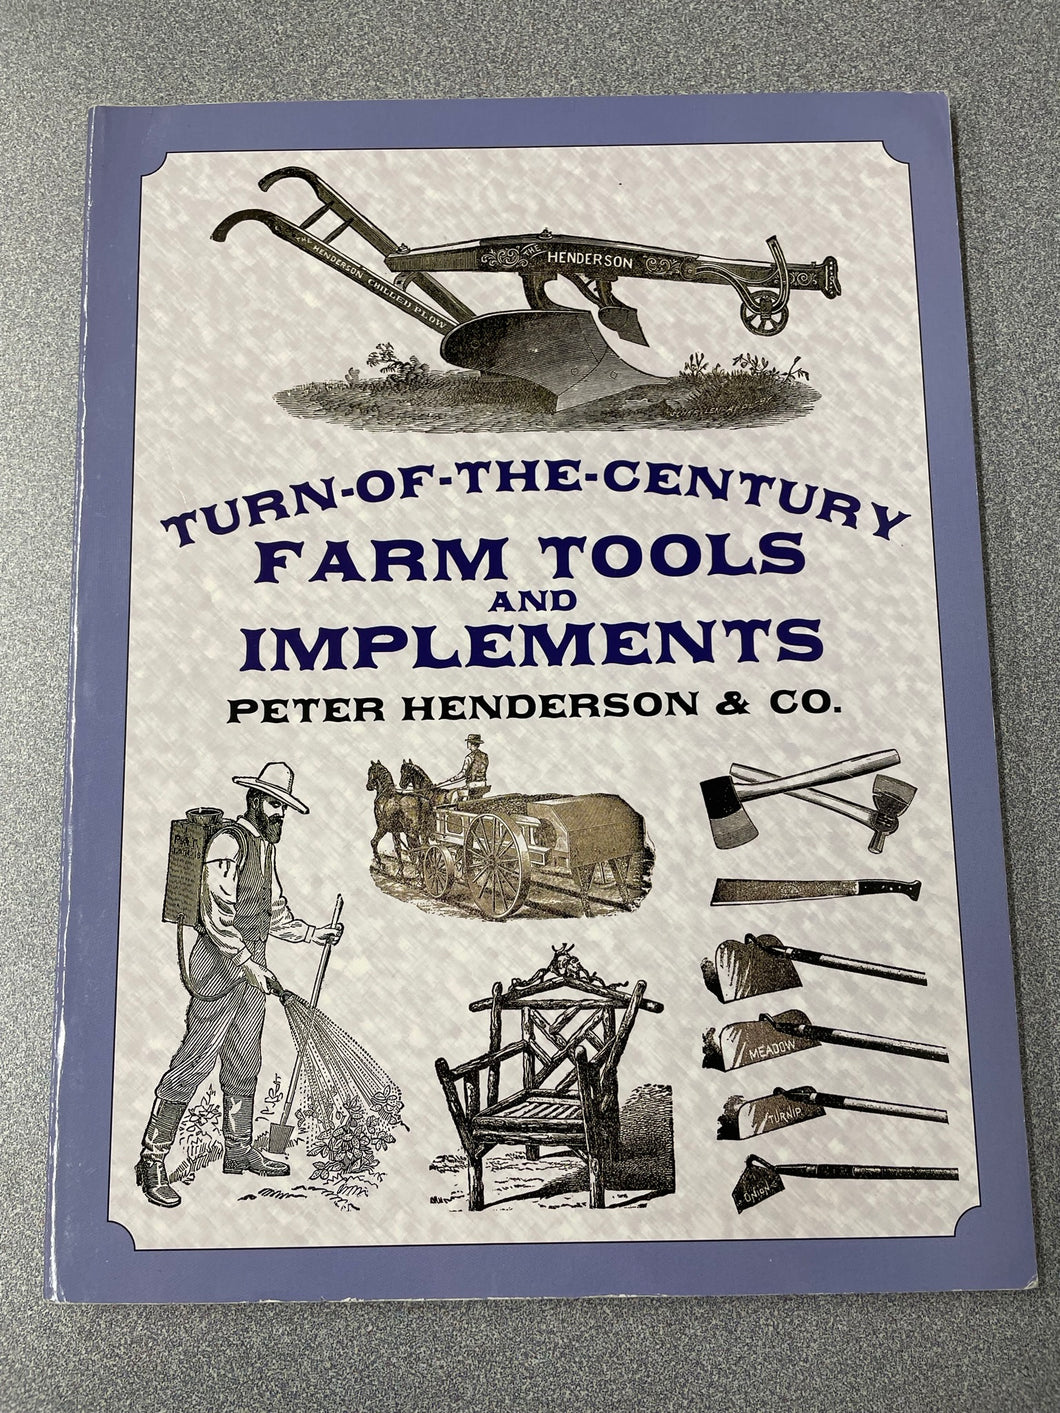 Turn-Of-The-Centutry Farm Tools and Implements [2002] VA 4/23